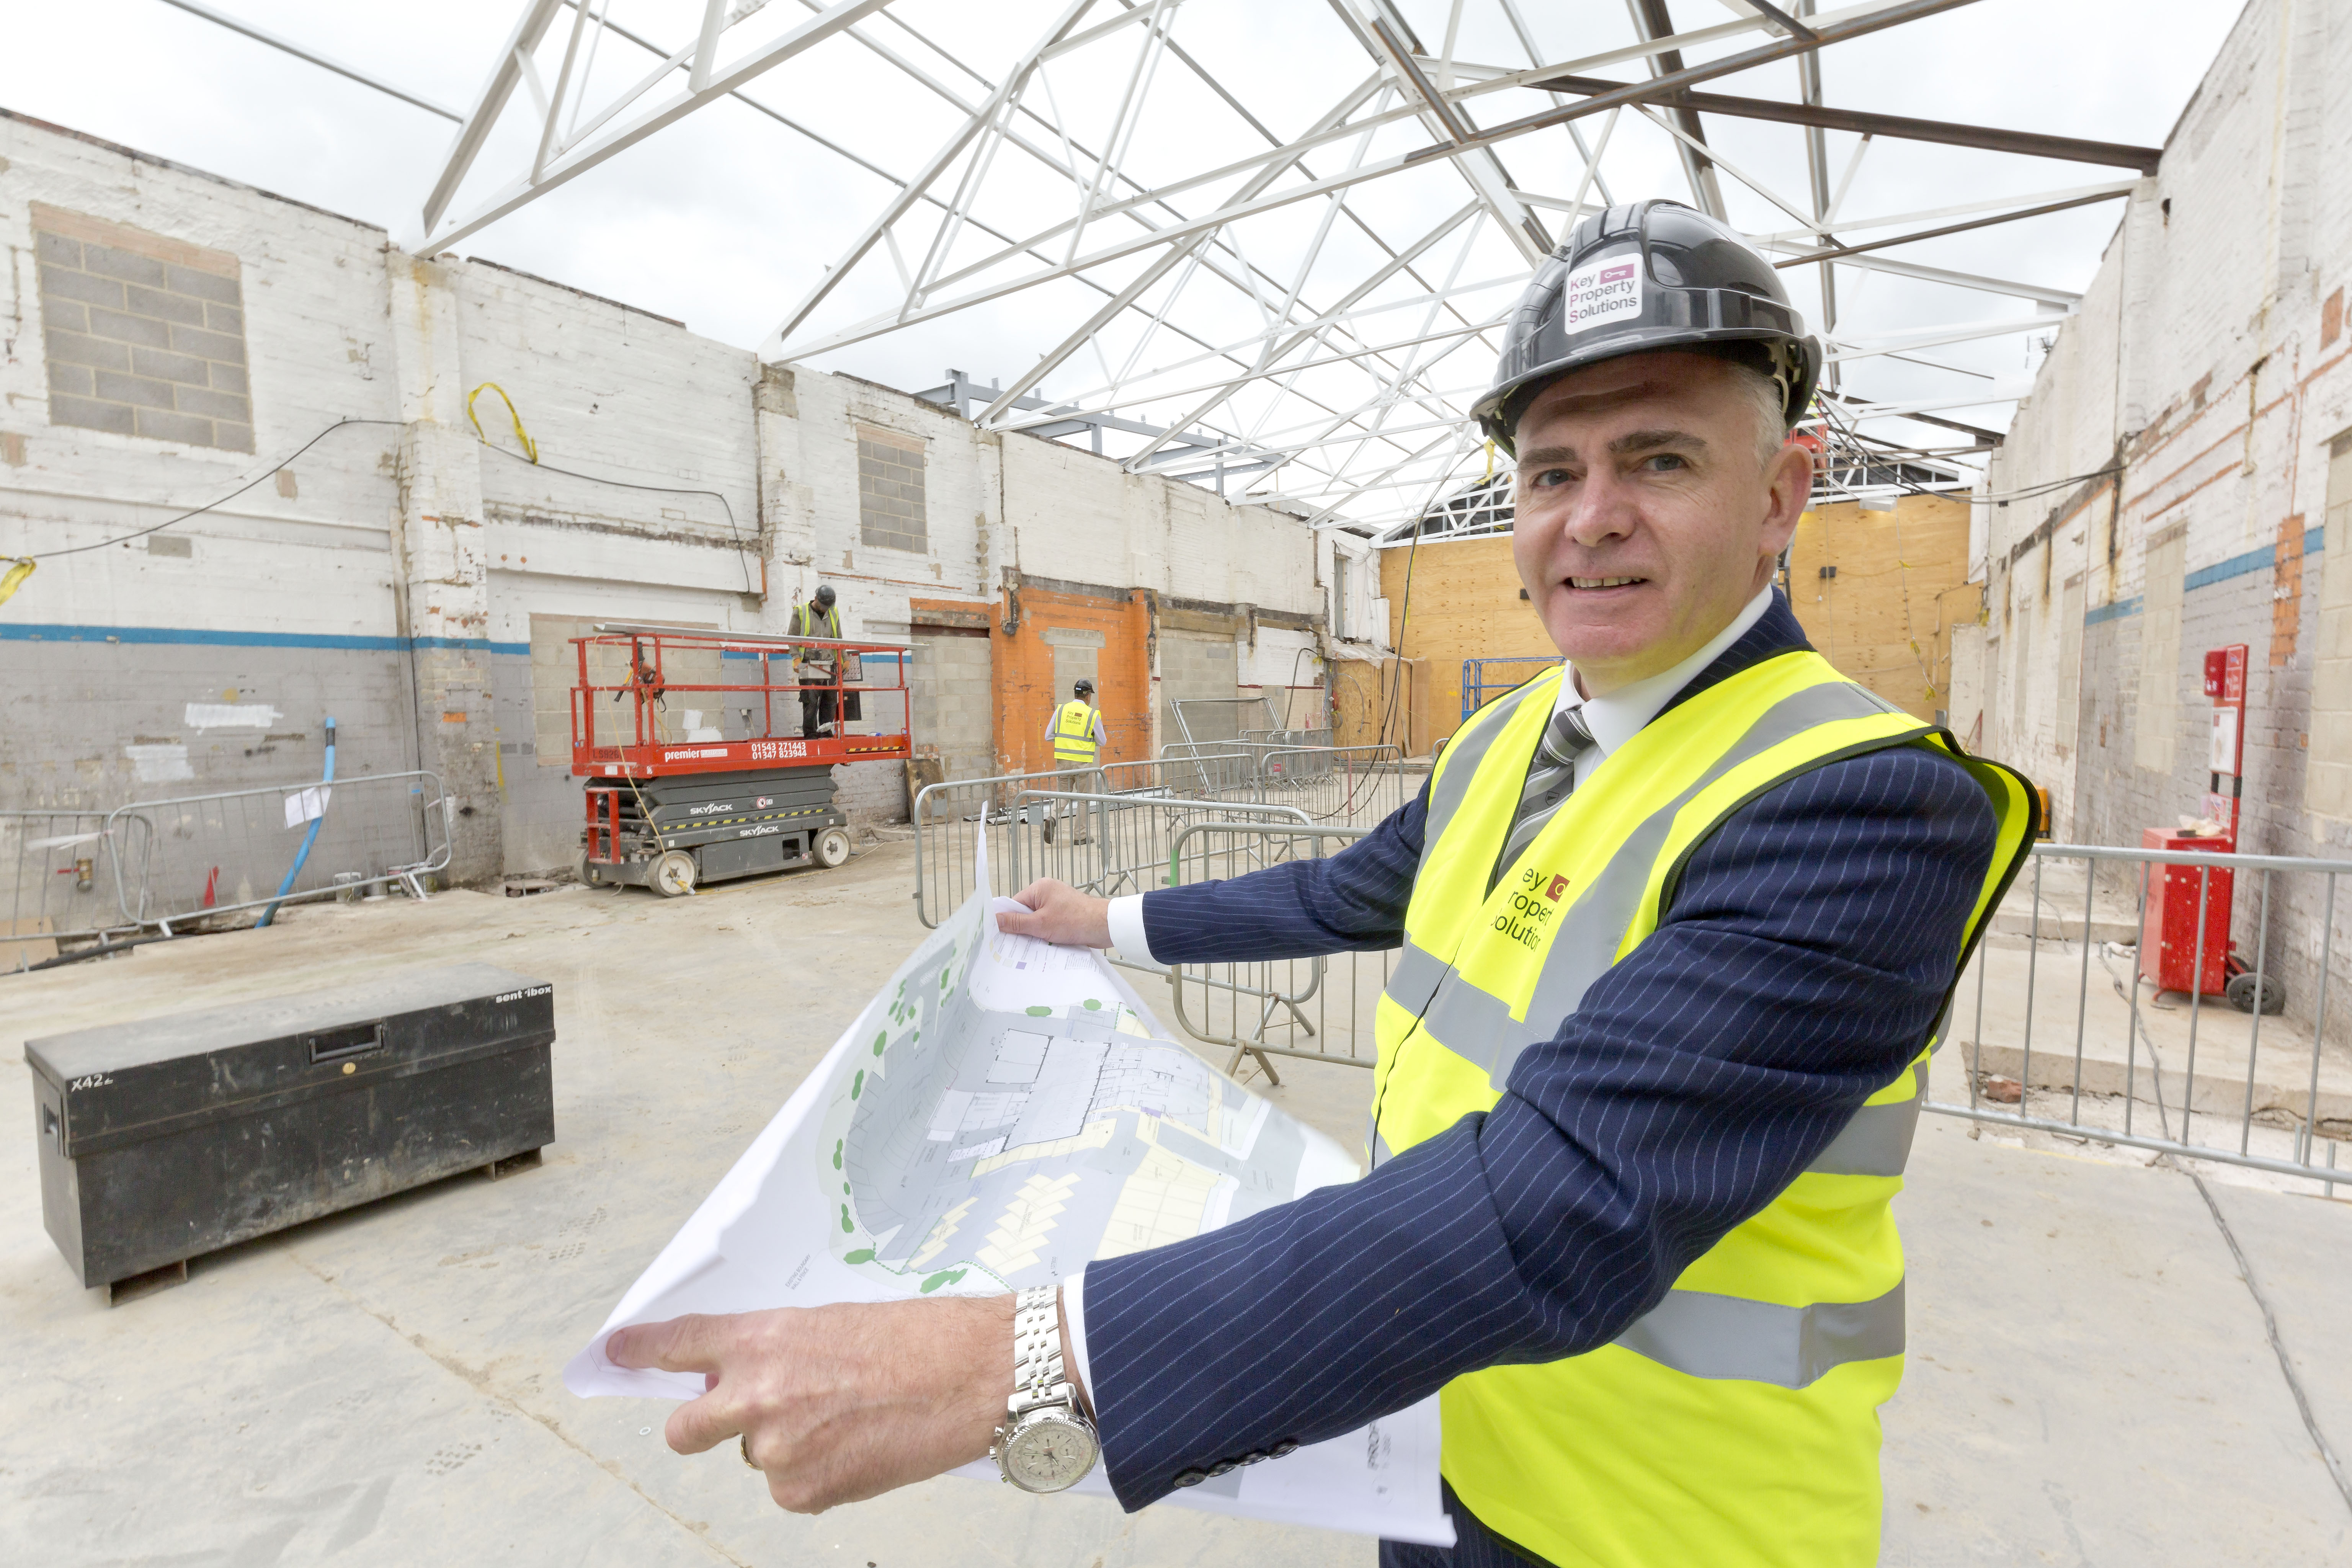 Head of Business appointed at ongoing Guiseley refurbishment